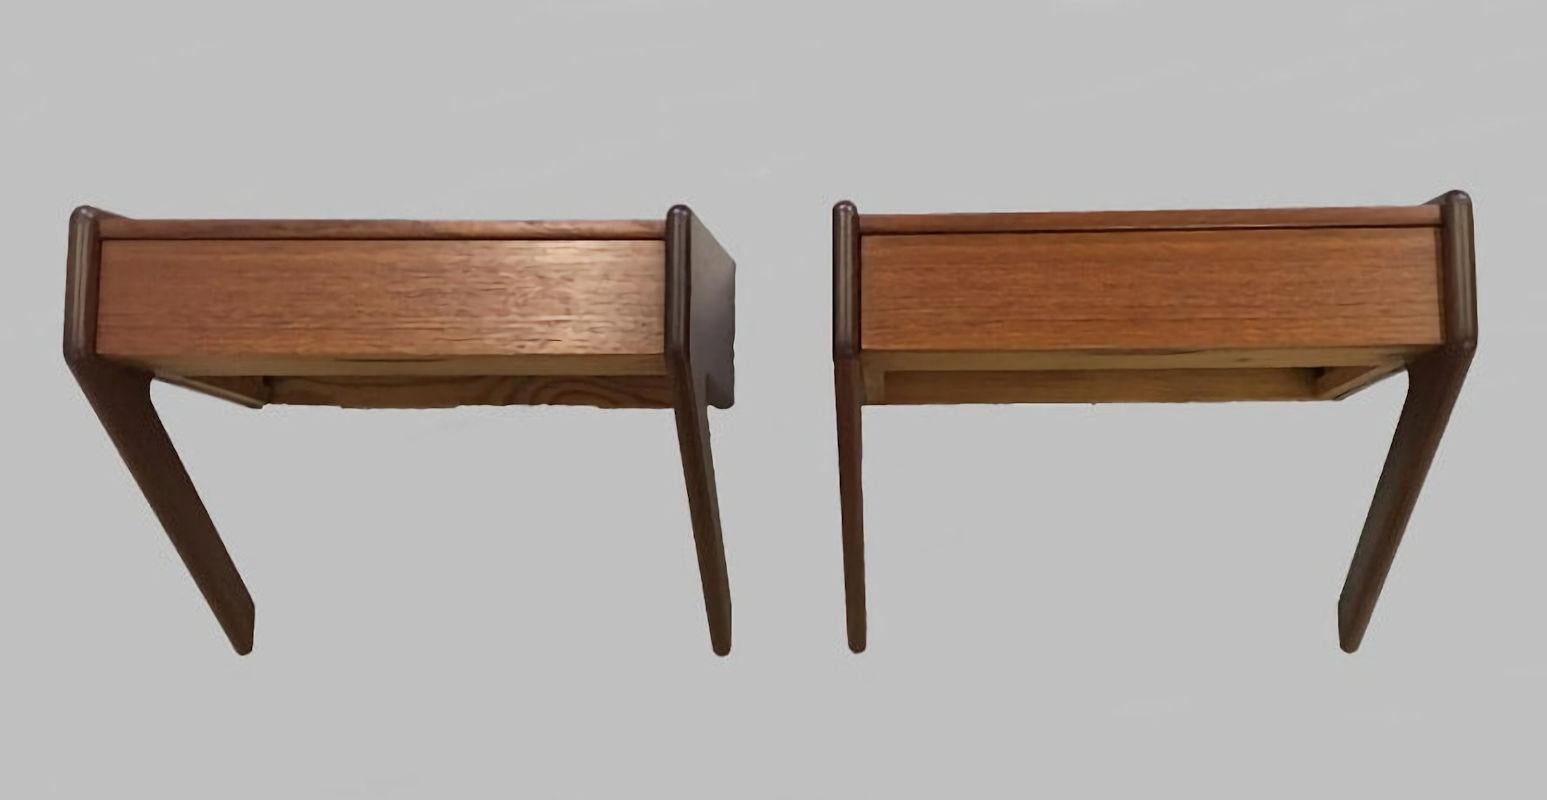 1960s Set of two Danish Sigfred Omann floating nightstands in teak by Oelholm

A pair of floating nightstands or shelves in teak, each with a single drawer, designed by Sigfred Omann for Ølholm Møbelfabrik. The nightstands feature a simple